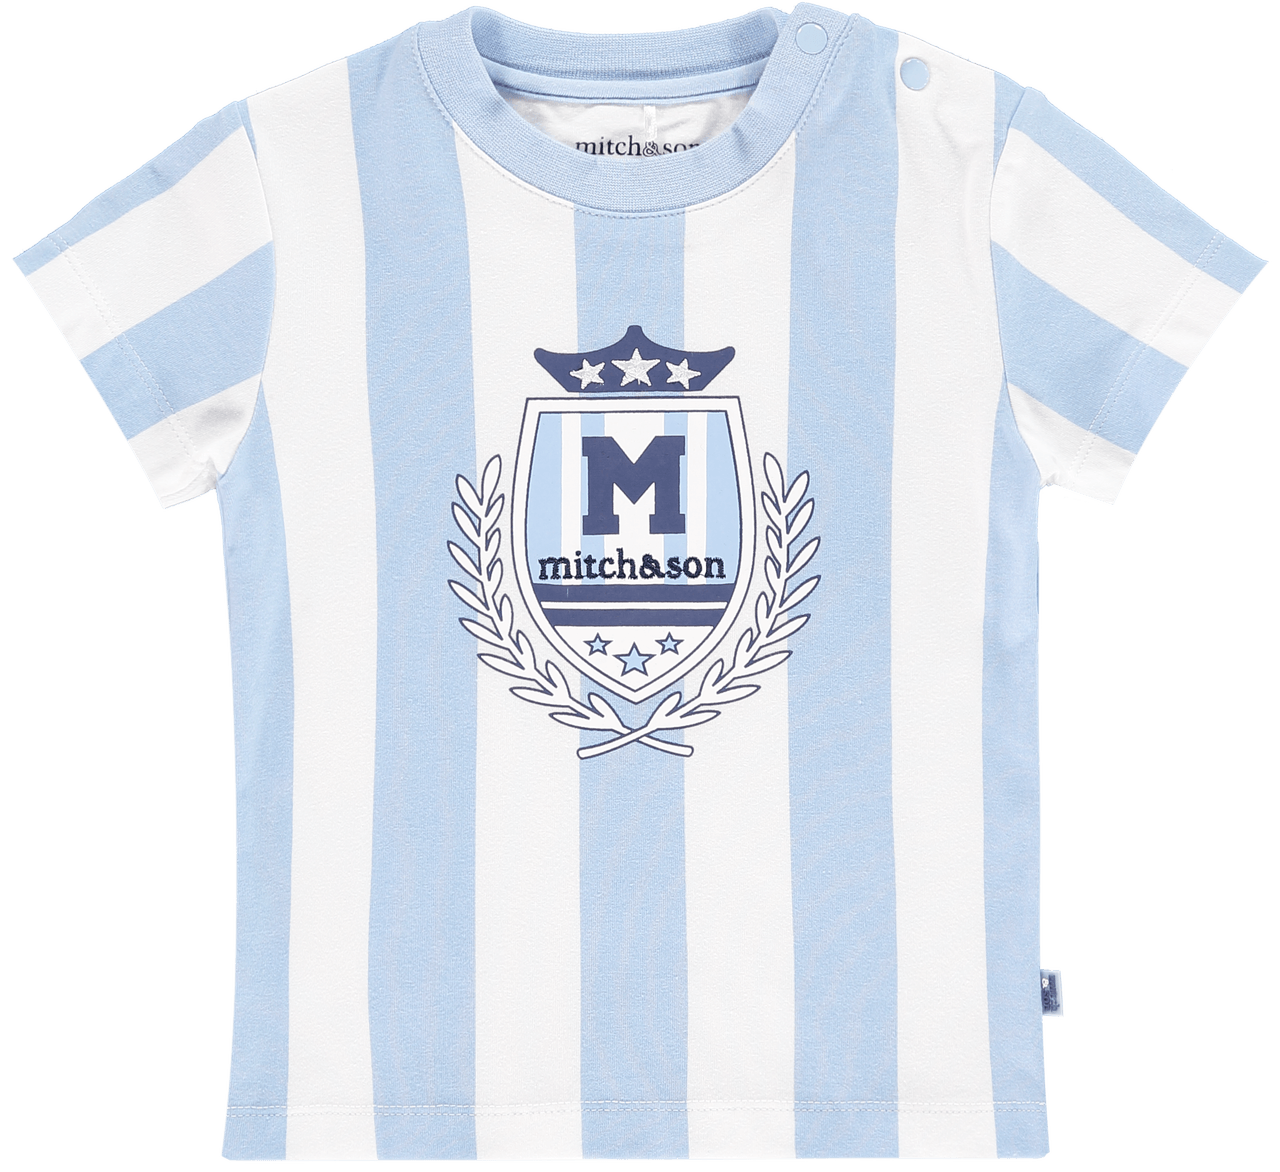 White and Blue T Logo - Mitch & Son - White/Blue T-Shirt - 1105 - Kiddie Boutique By Claire